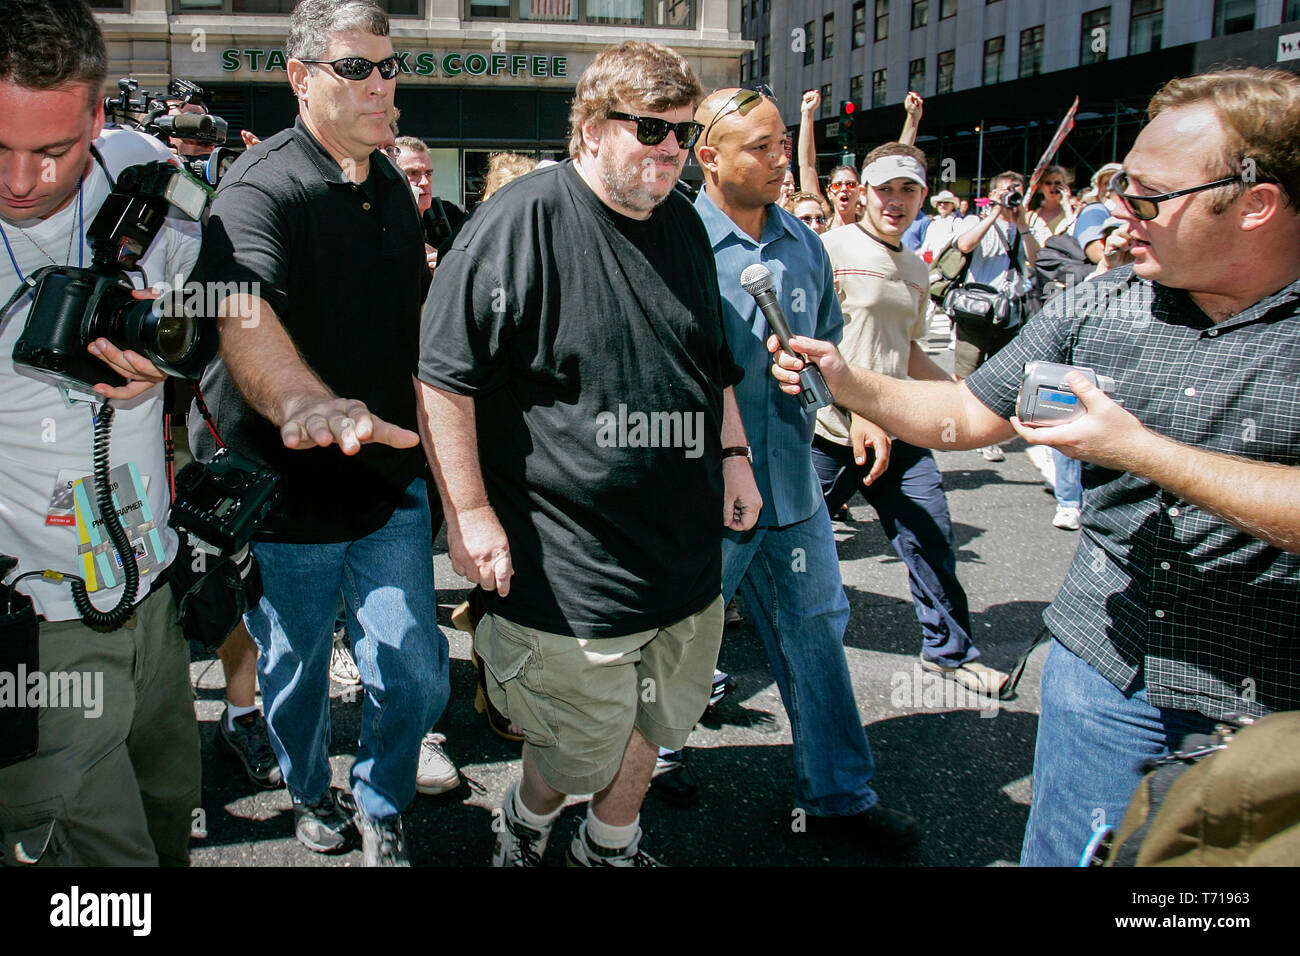 Documentary film maker and author Michael Moore is escorted by bodyguards while attending a protest march during the Republican National Convention in New York. To the left of Moore, shock jock and conspiracy theorist Alex Jones is trying to interview Moore. Stock Photo